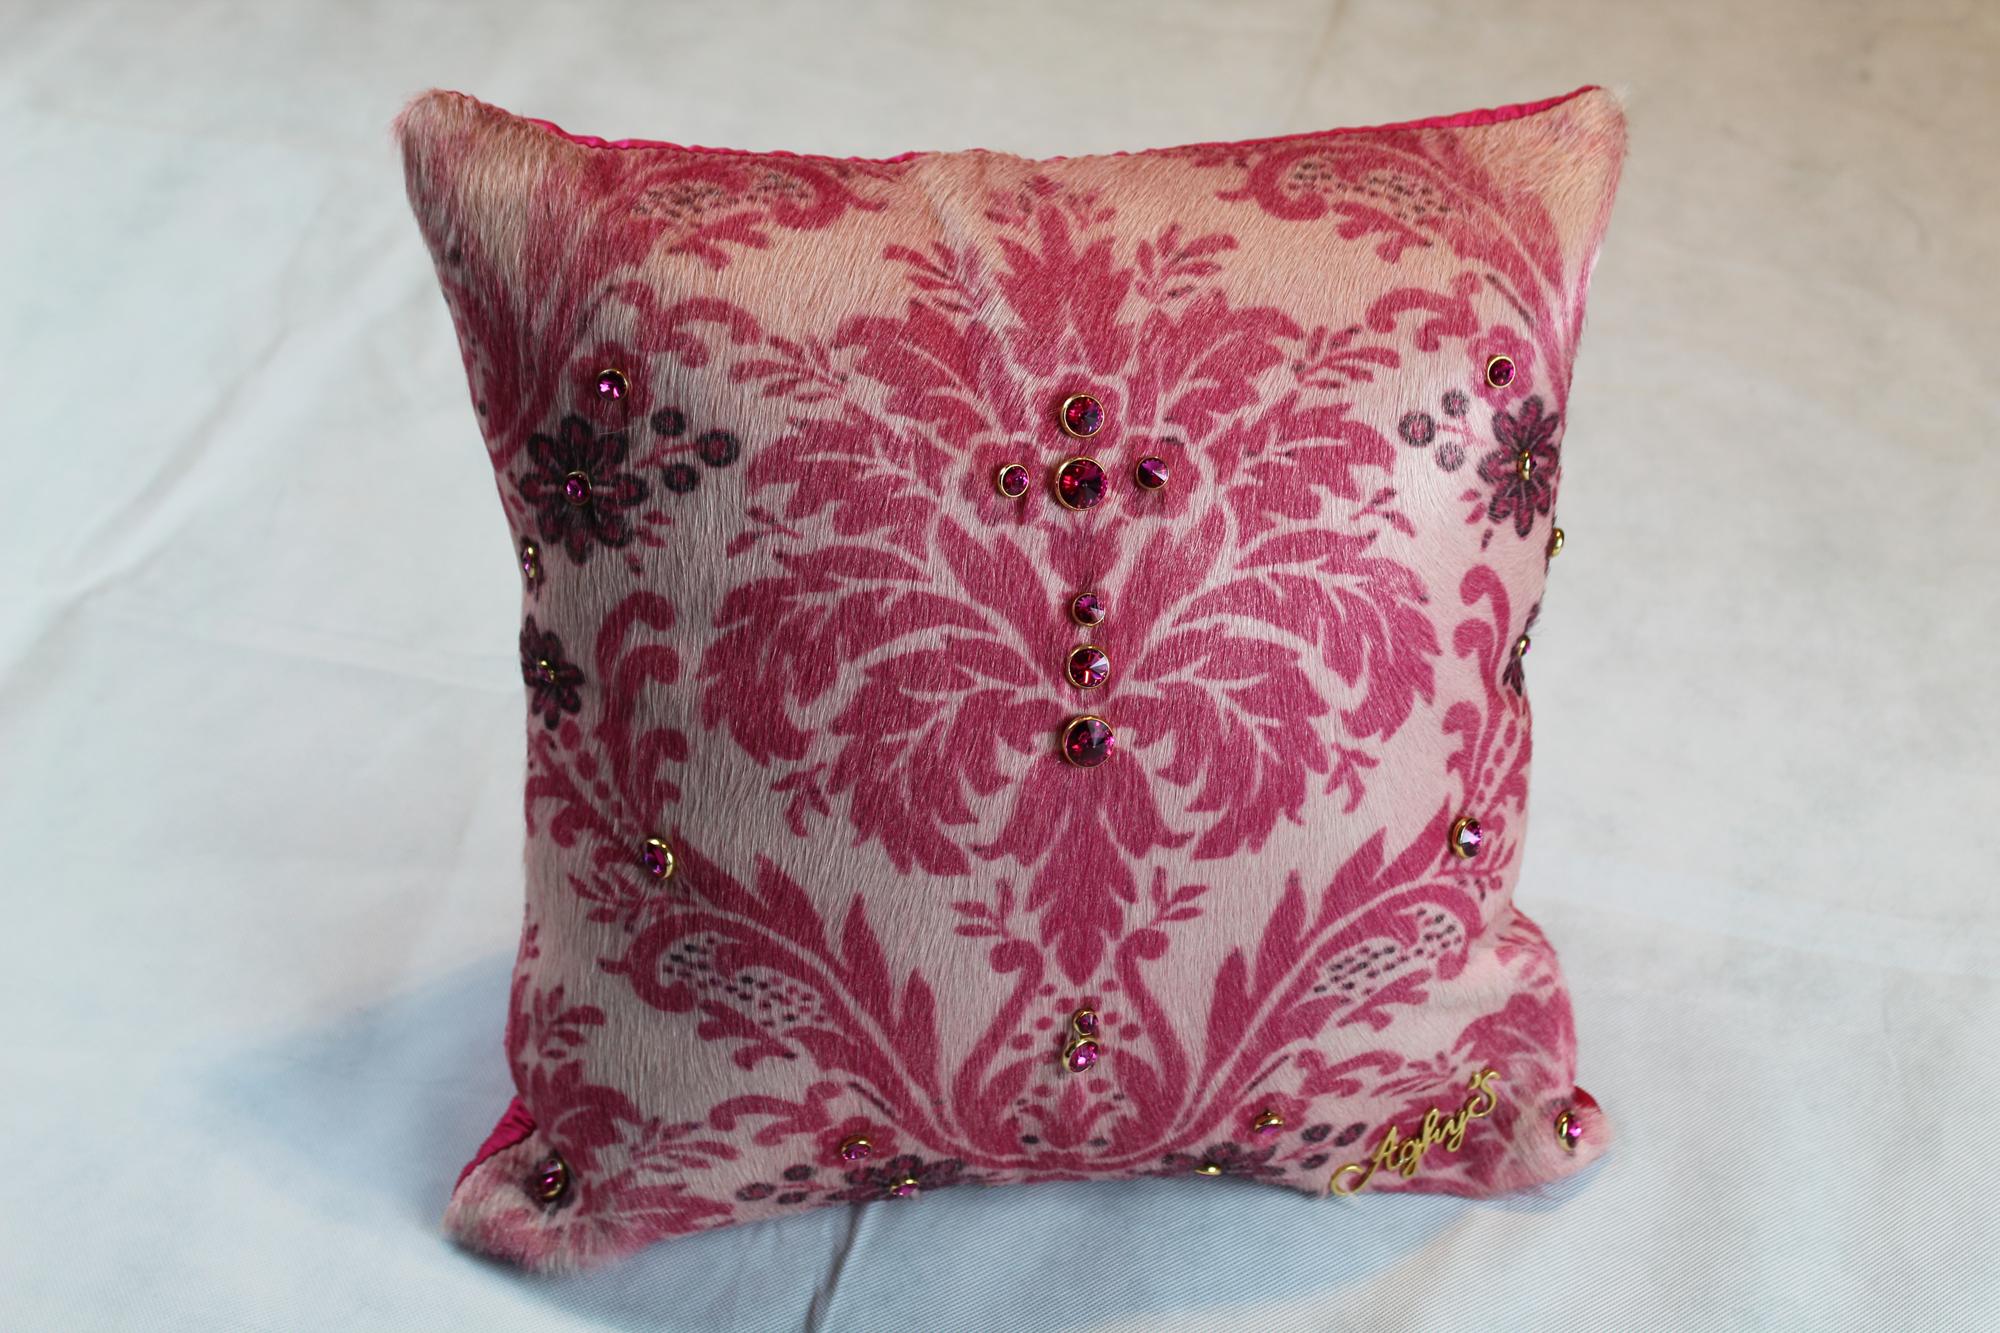 Cow Leather Pink Cushion, Hand-Painted Damask, Original Swarovski, Made in Italy 2